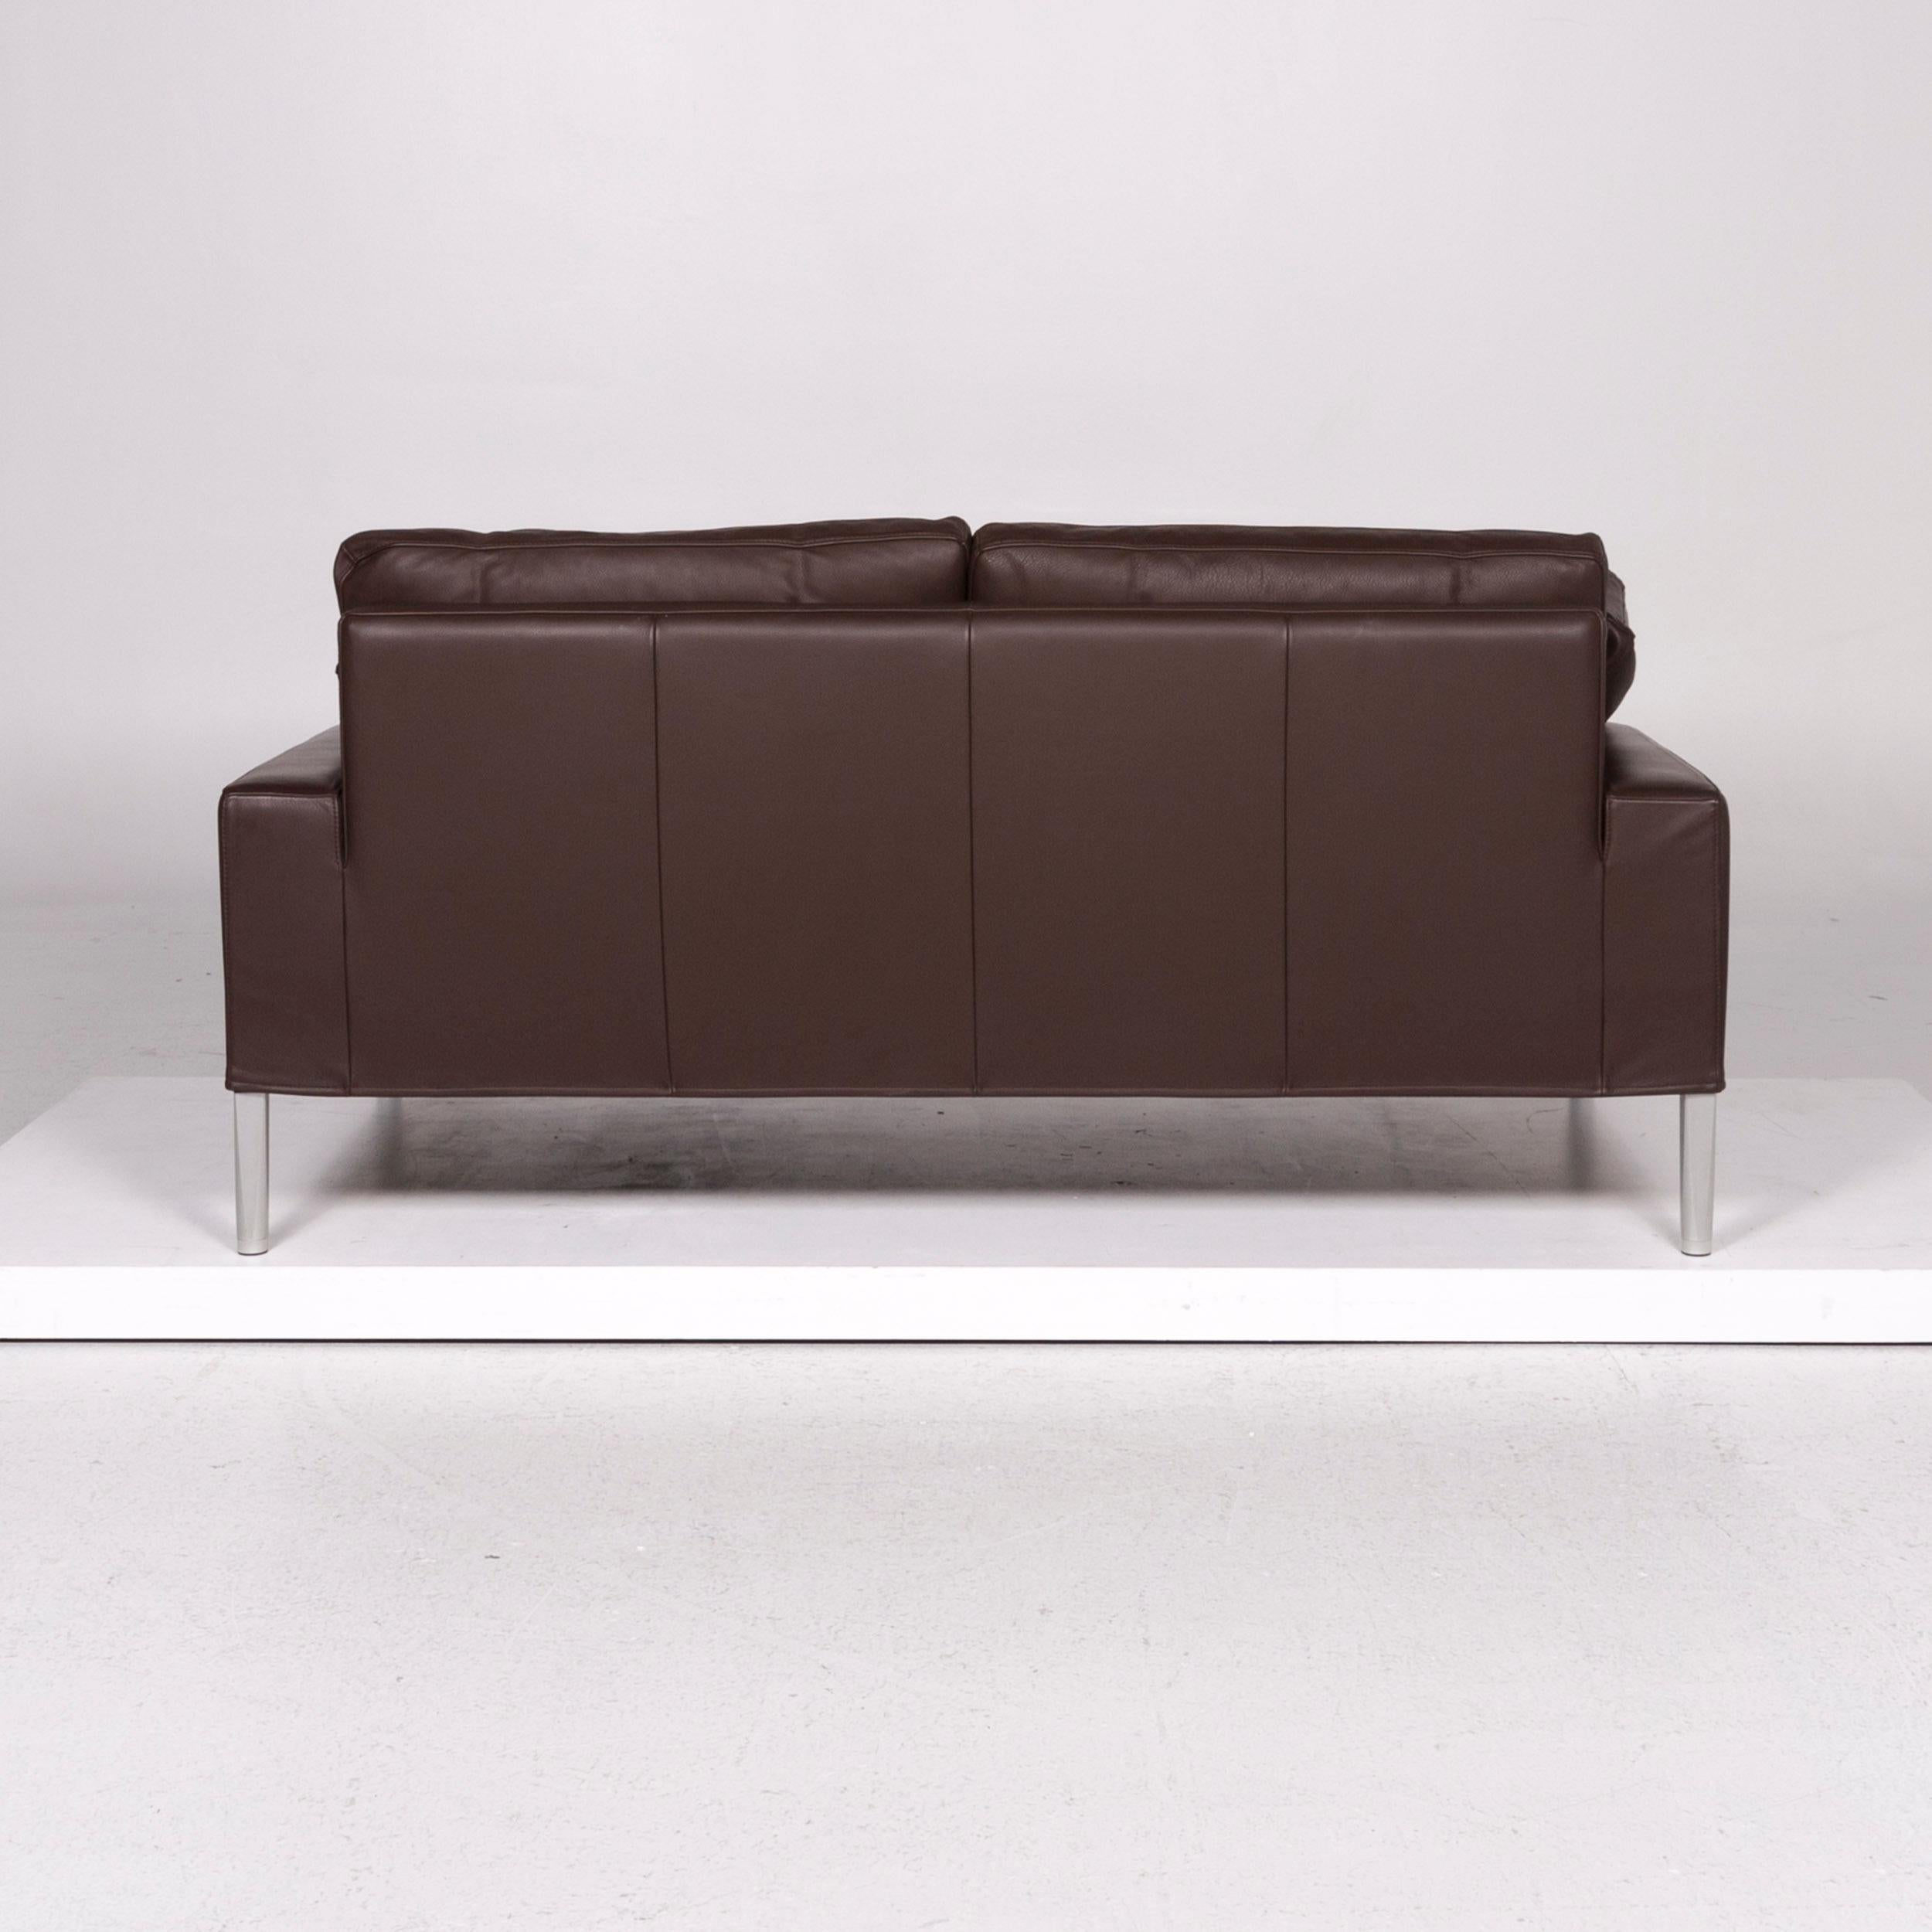 FSM Clarus Leather Sofa Set Brown Dark Brown 1 Three-Seat 1 Two-Seat For Sale 14